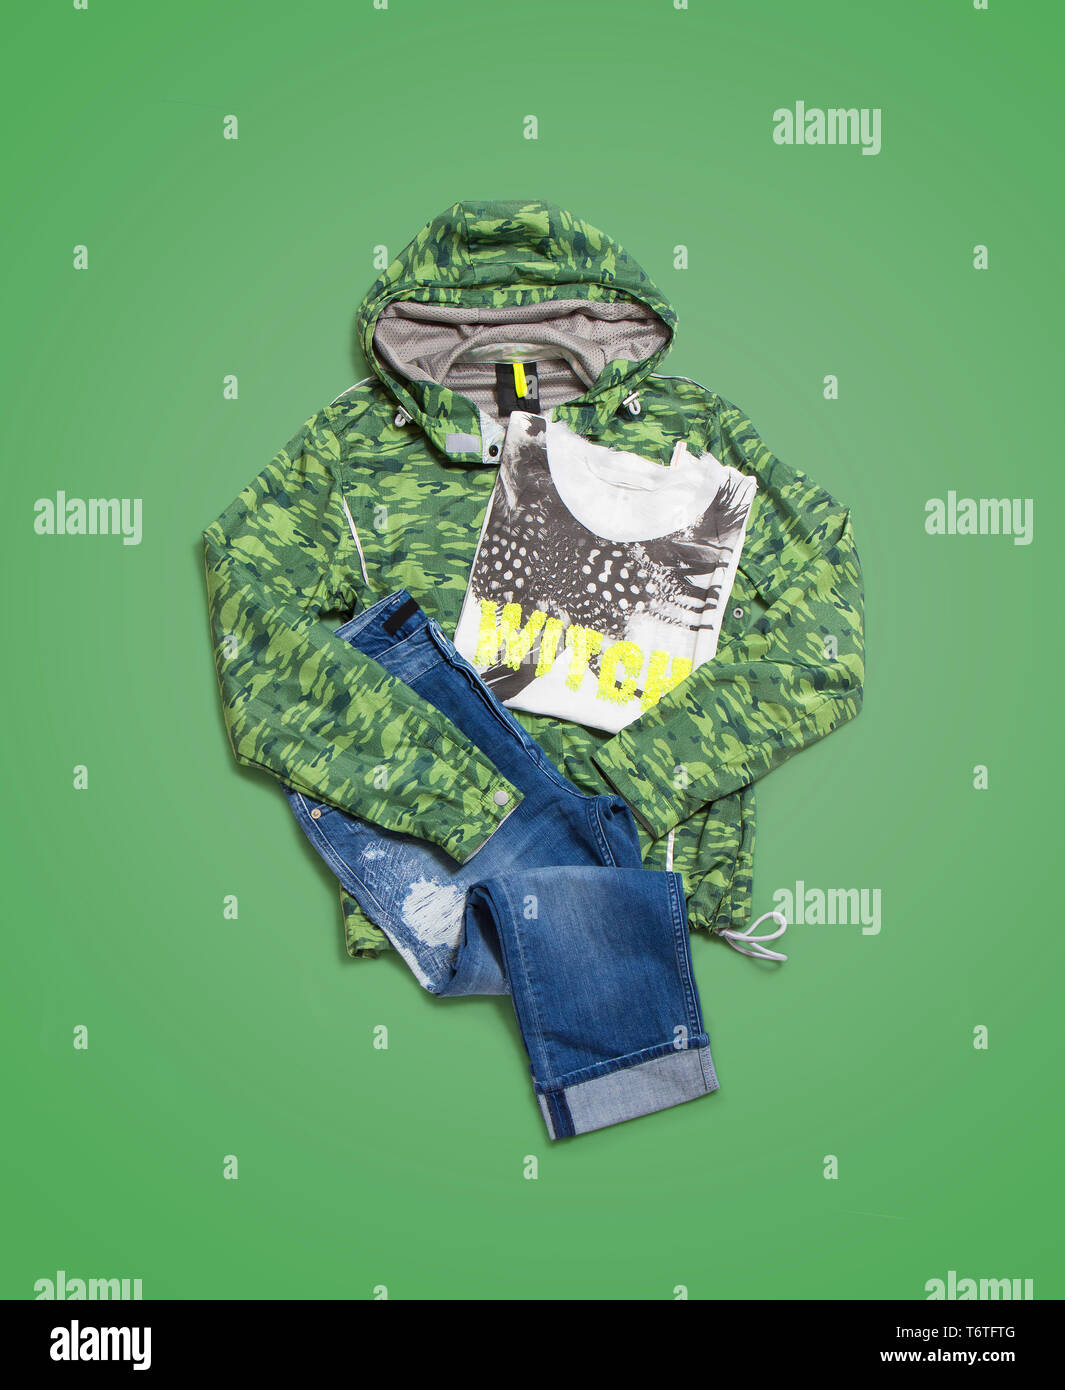 Men's casual clothes on green background Stock Photo